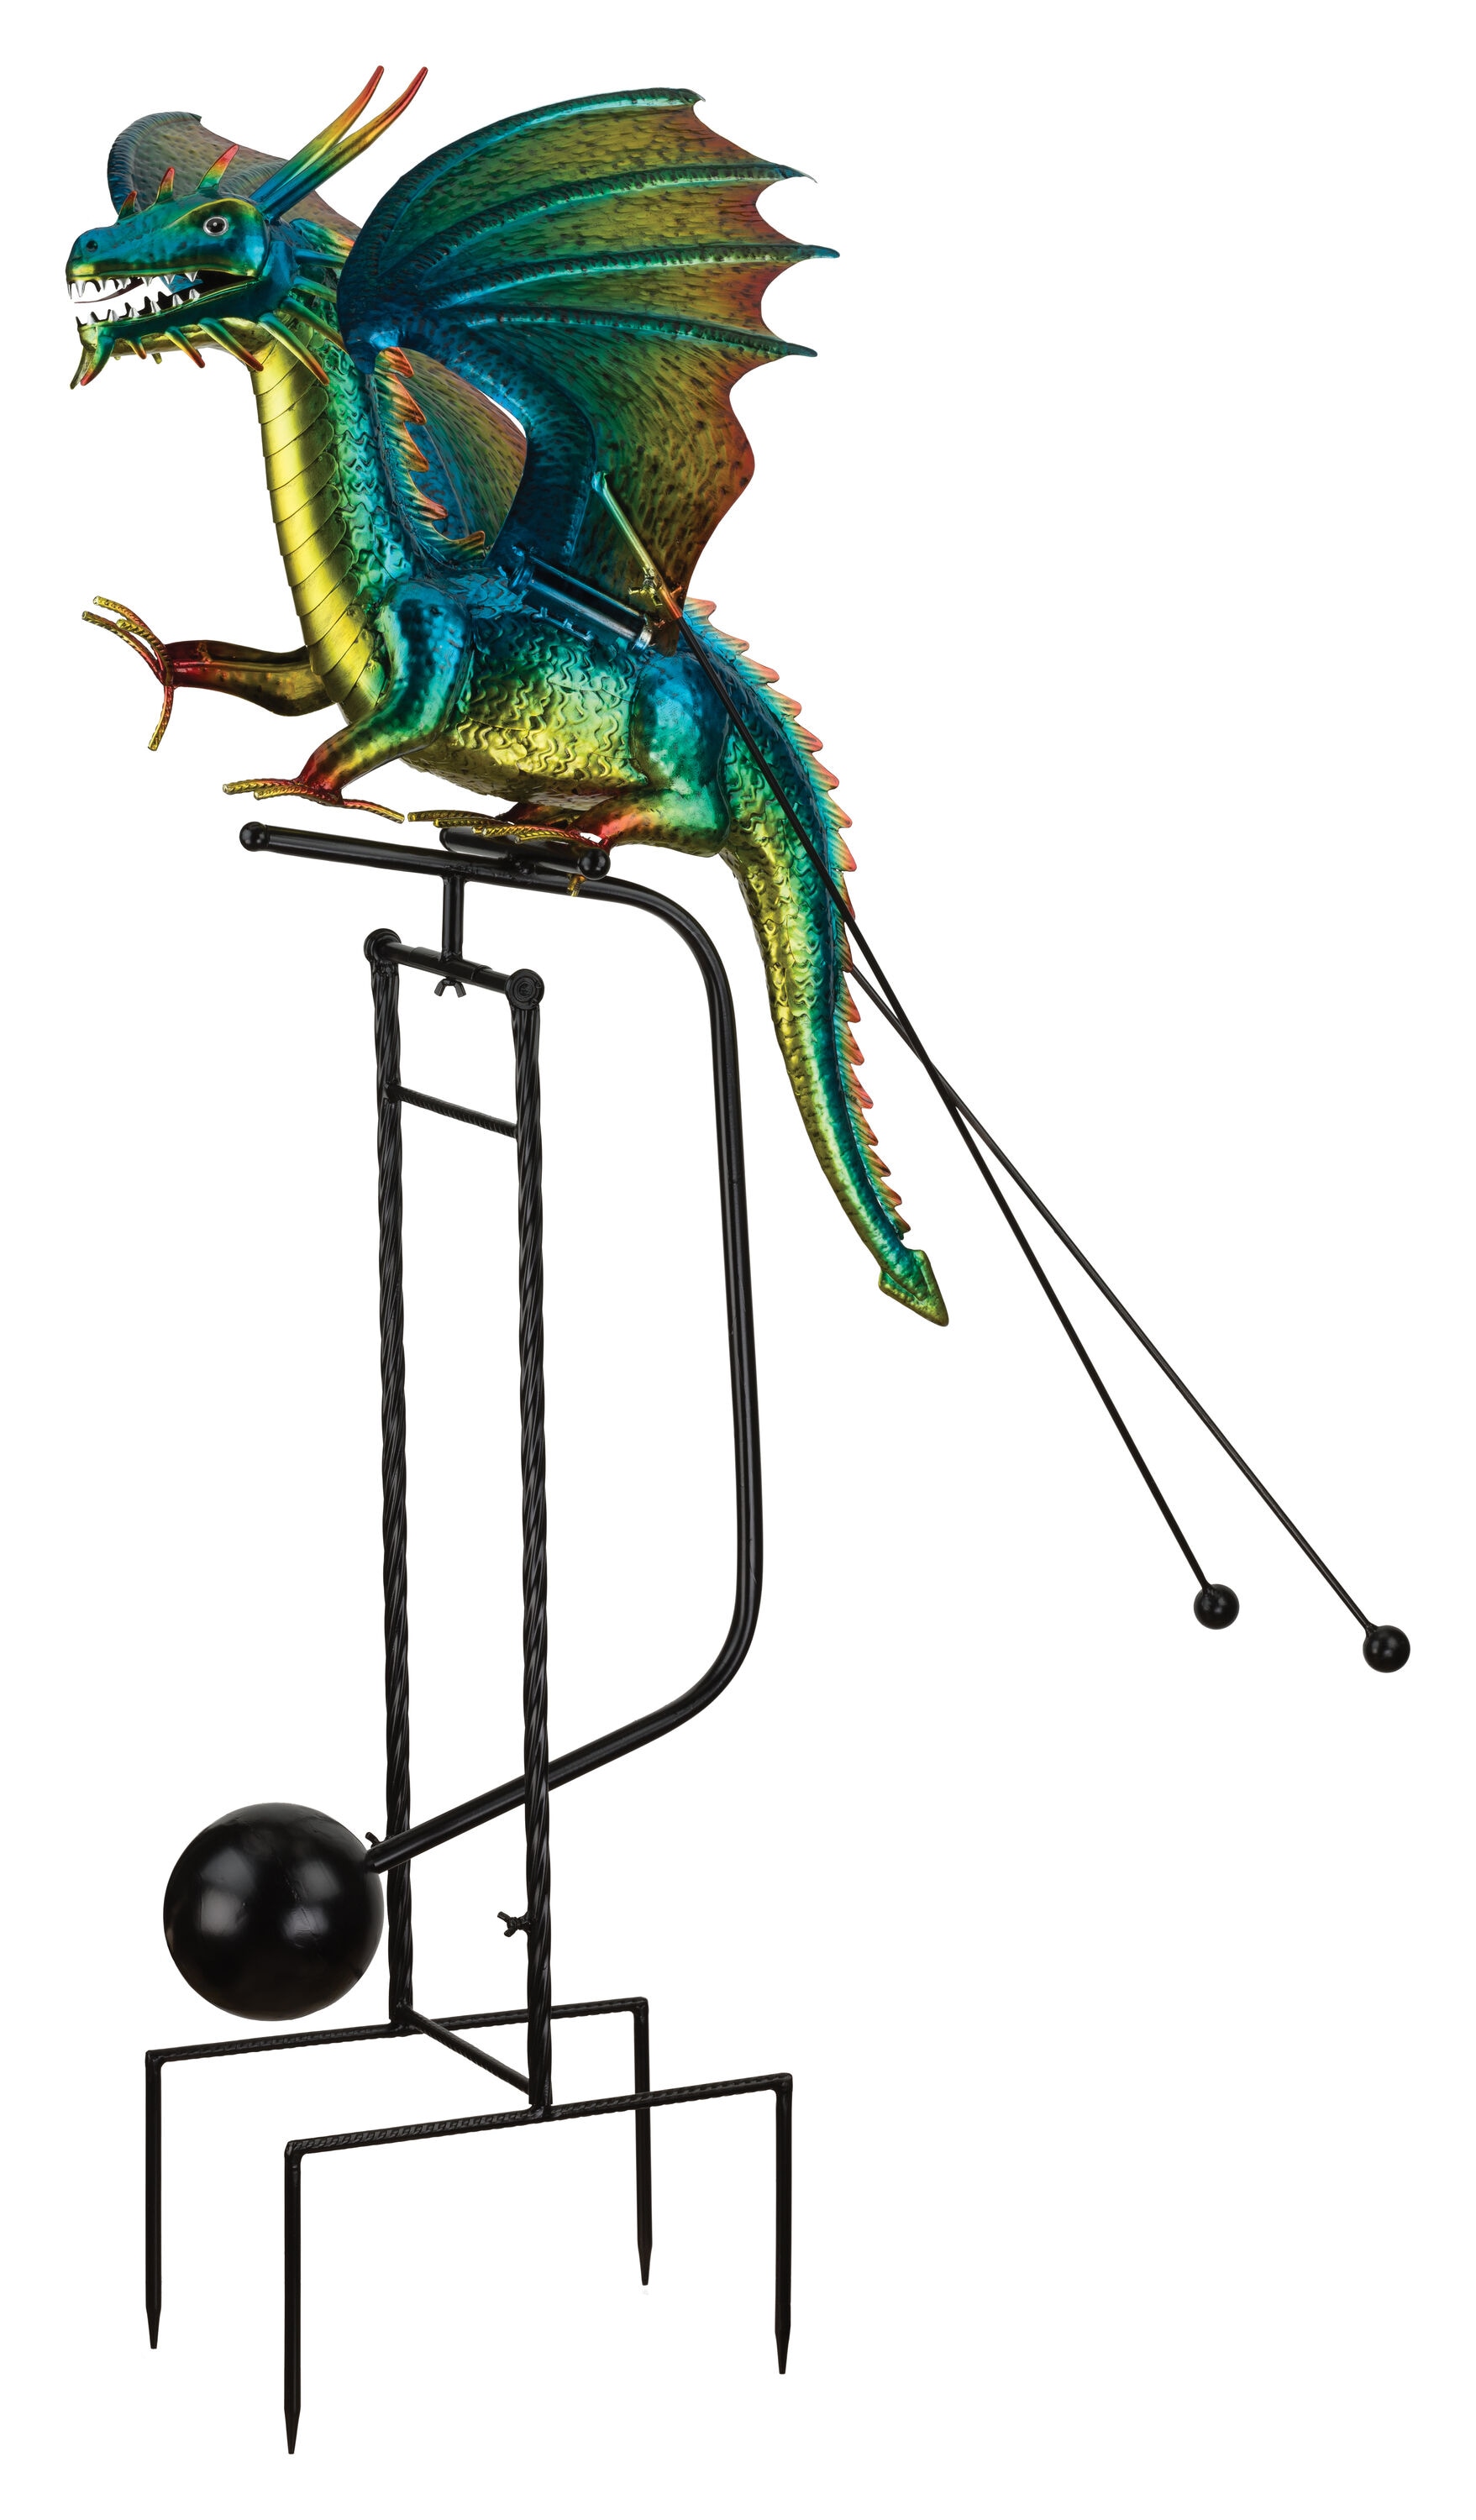 Set of 2, Extra Large 5.5FT. Tall Metal Peacock Statues with Acrylic Jewel  Decor